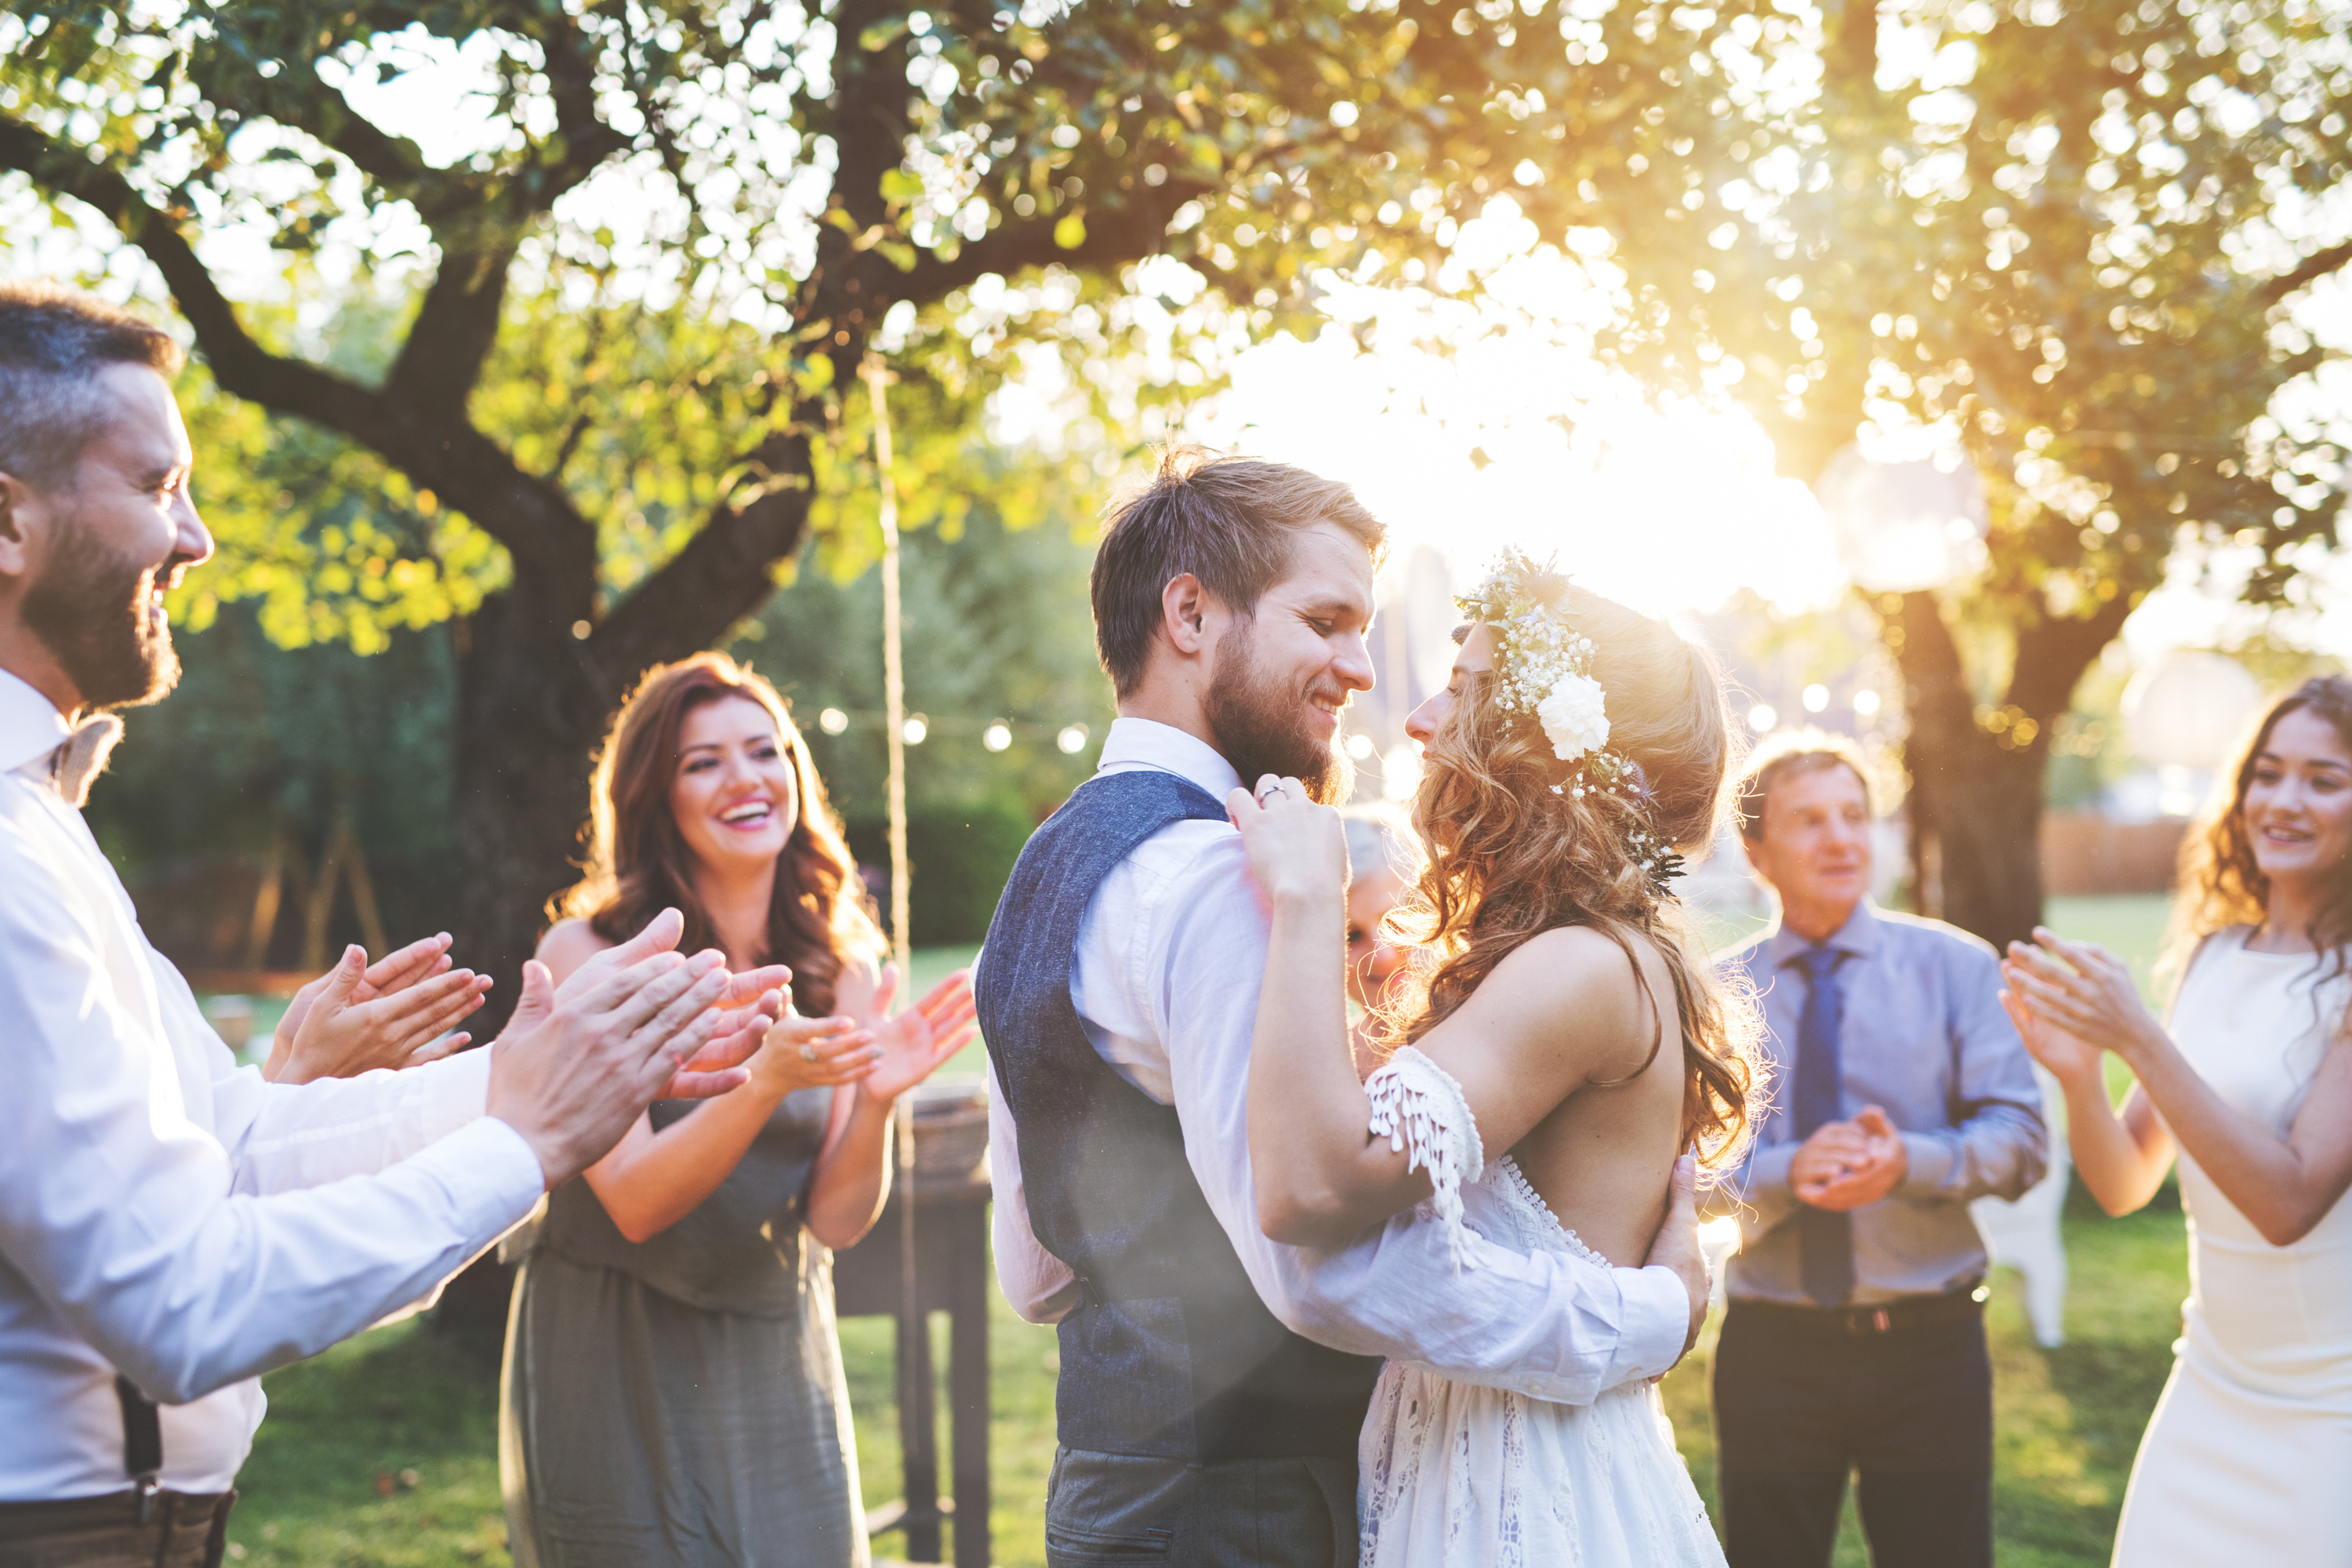 wedding etiquette | etiquette | wedding | wedding guests | how to act at weddings 